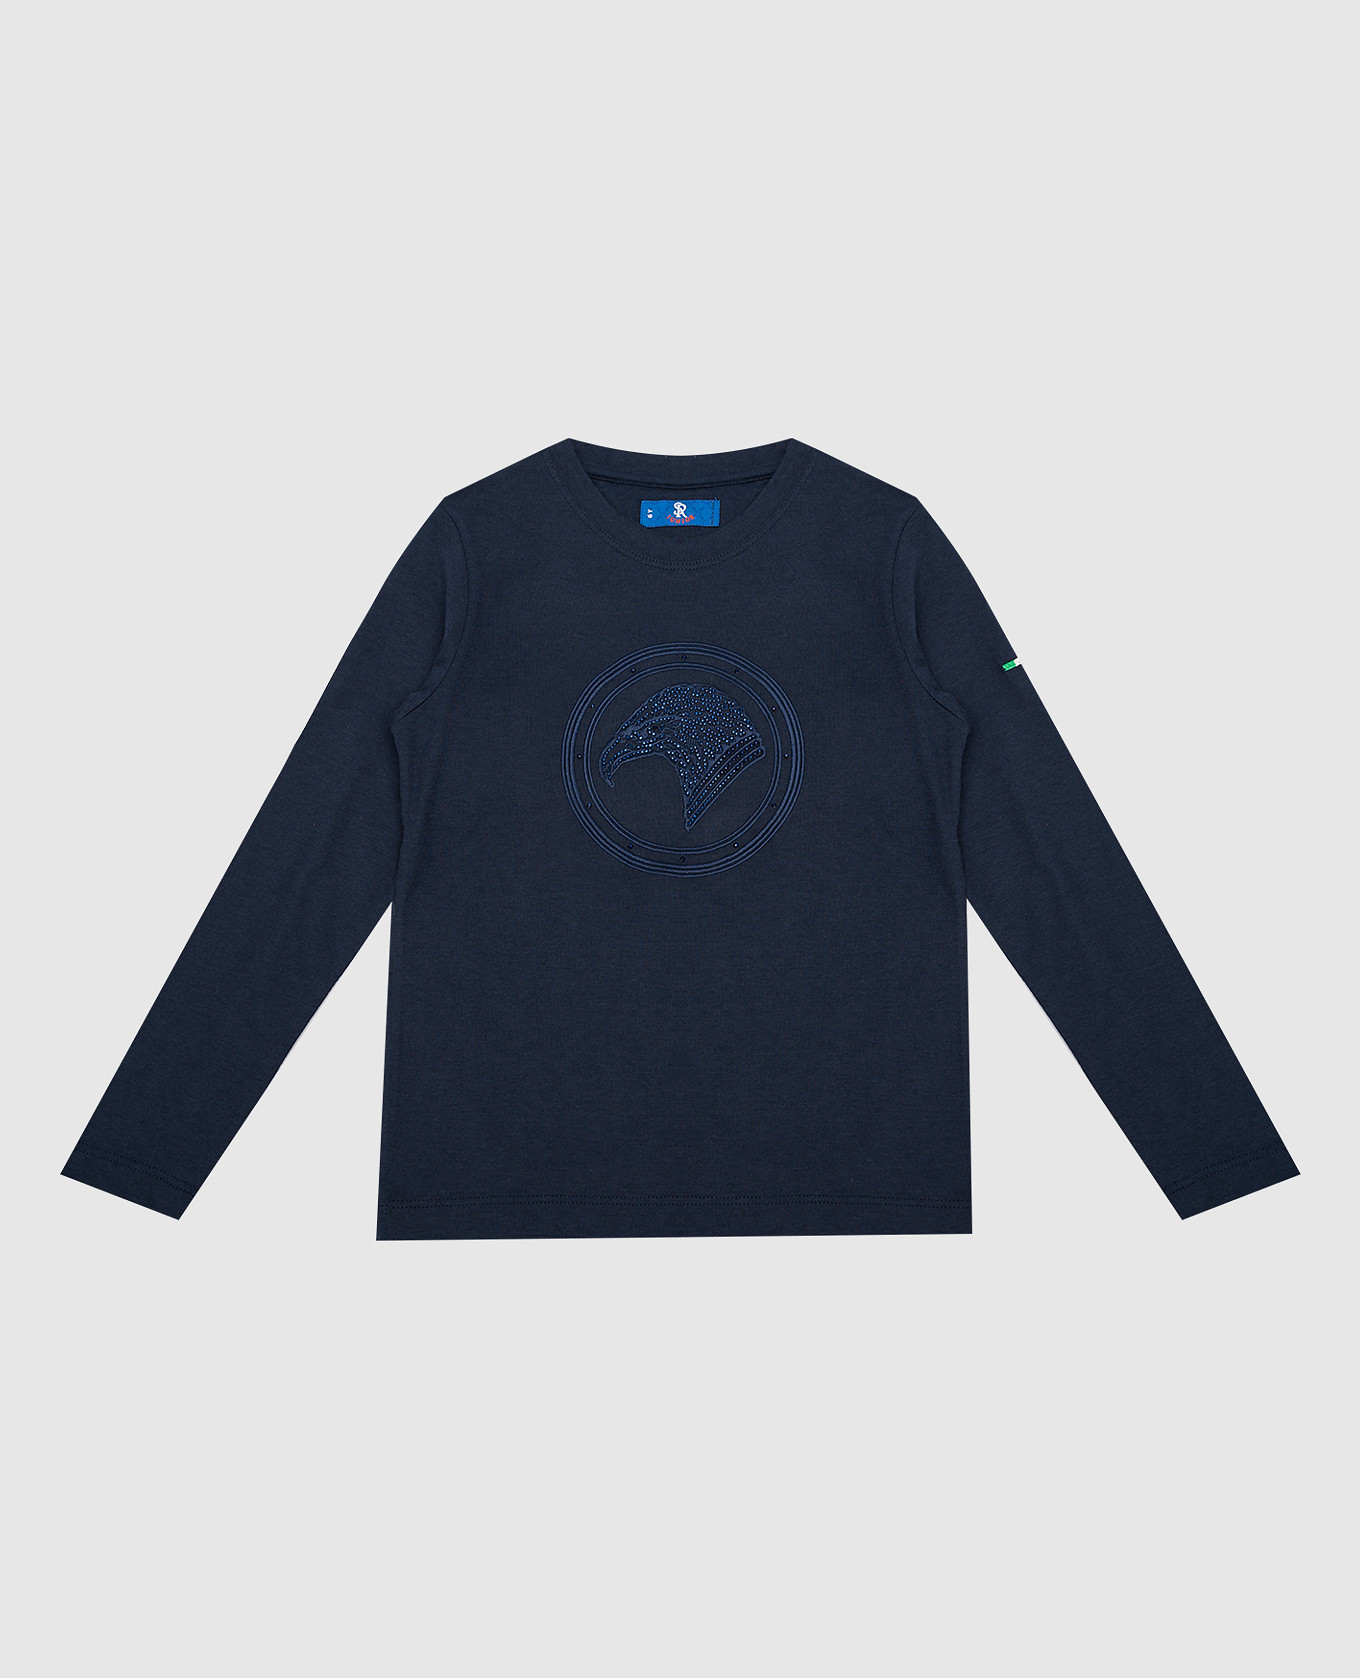 Children's blue longsleeve with embroidery and crystals